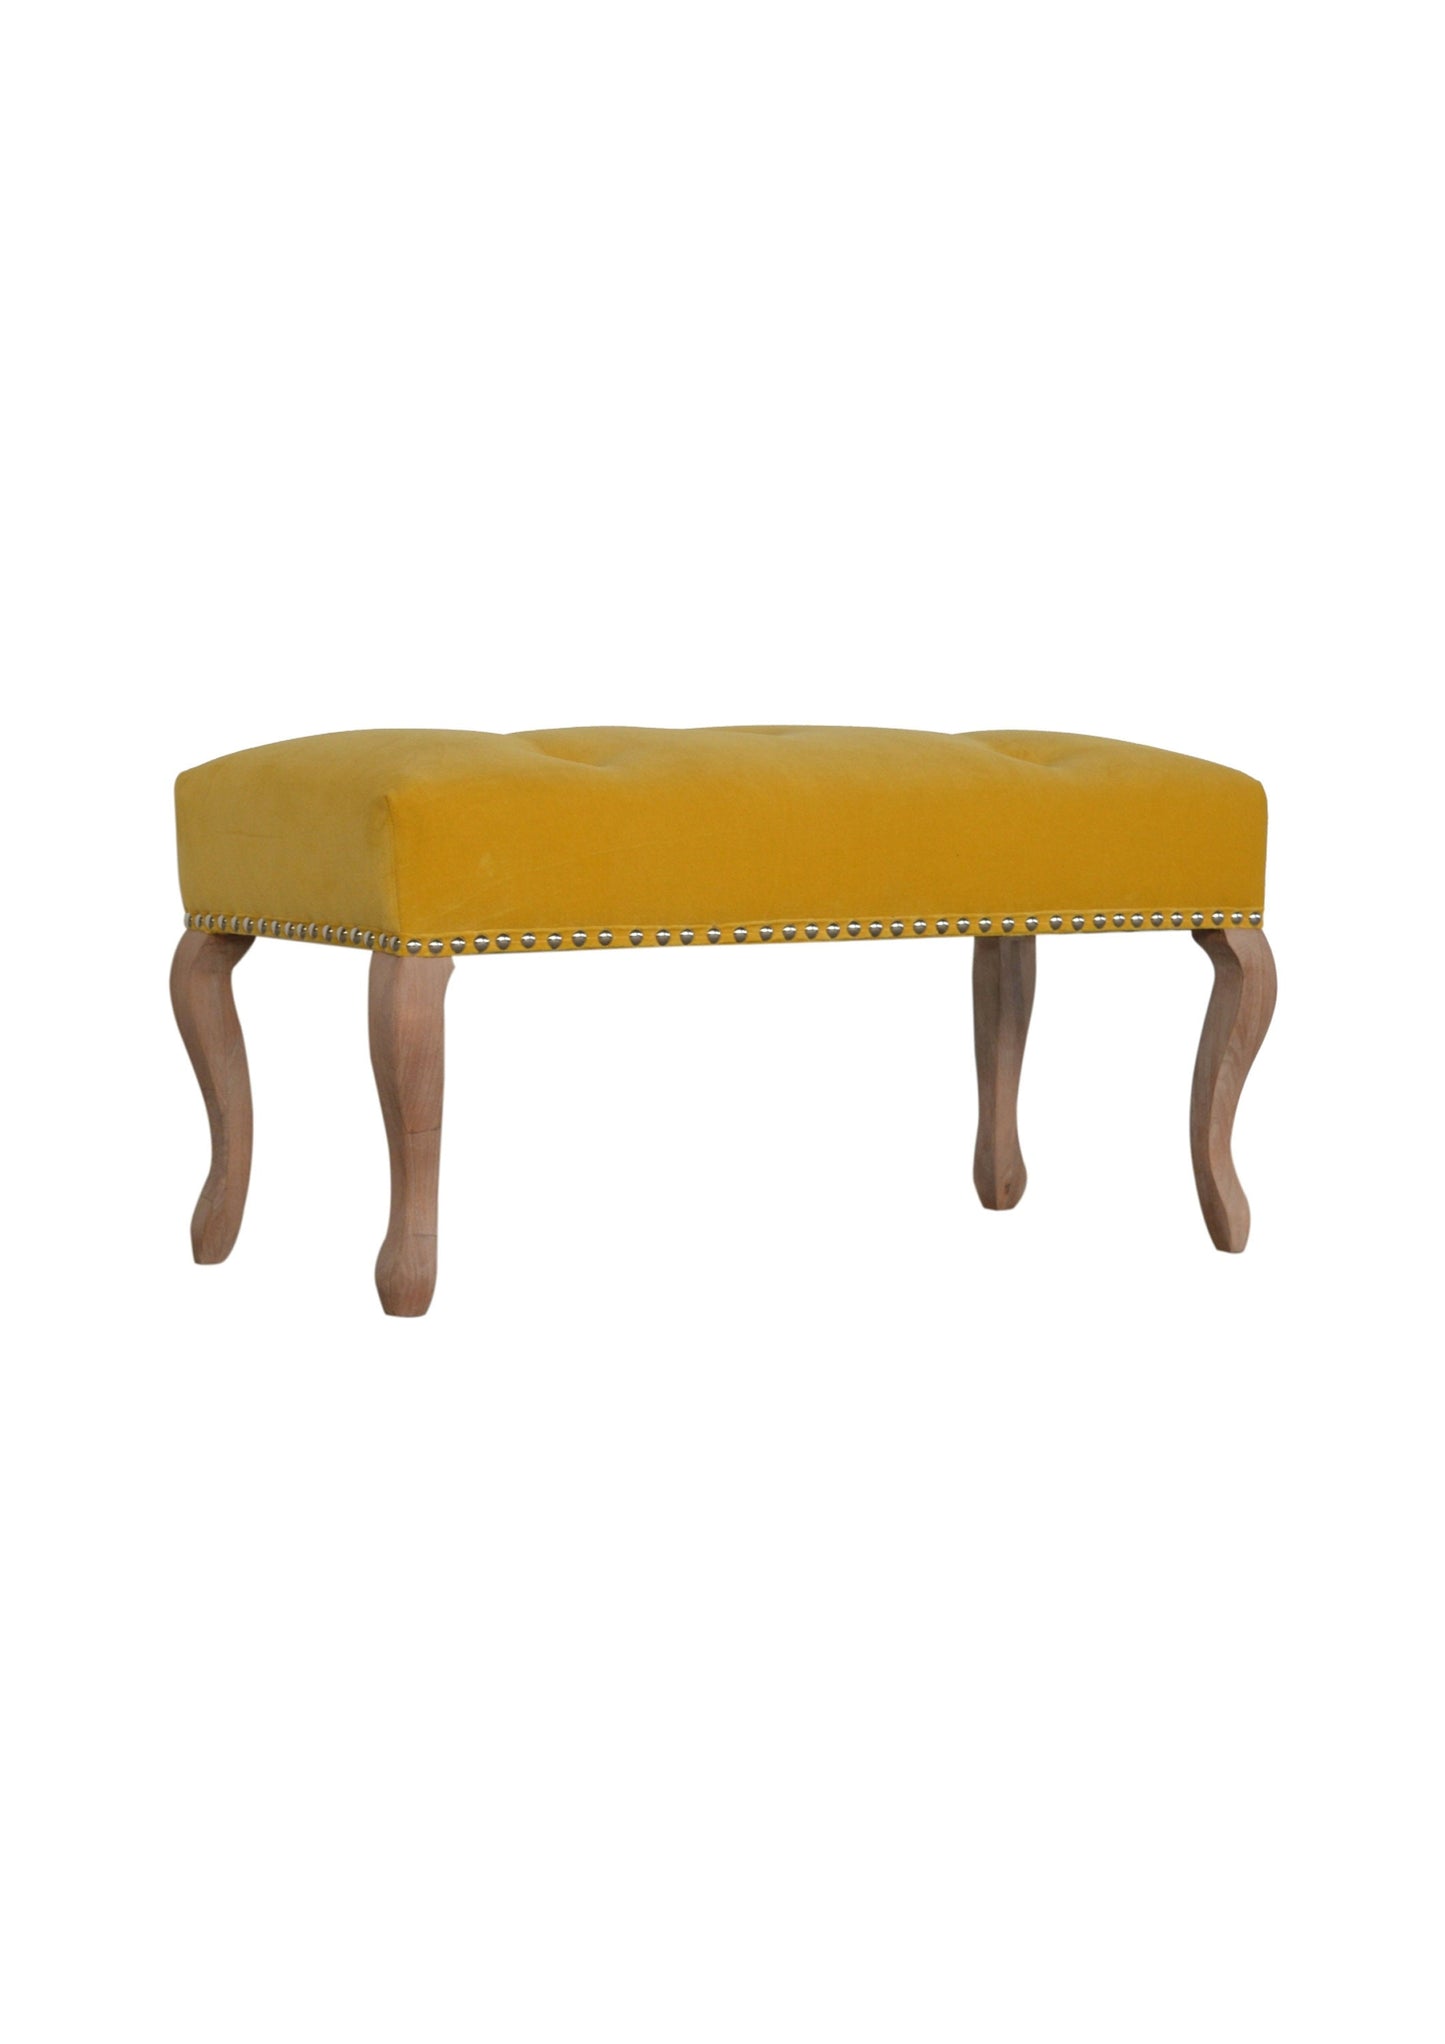 French Country Style Solid Wood Bench Upholstered in Yellow Velvet